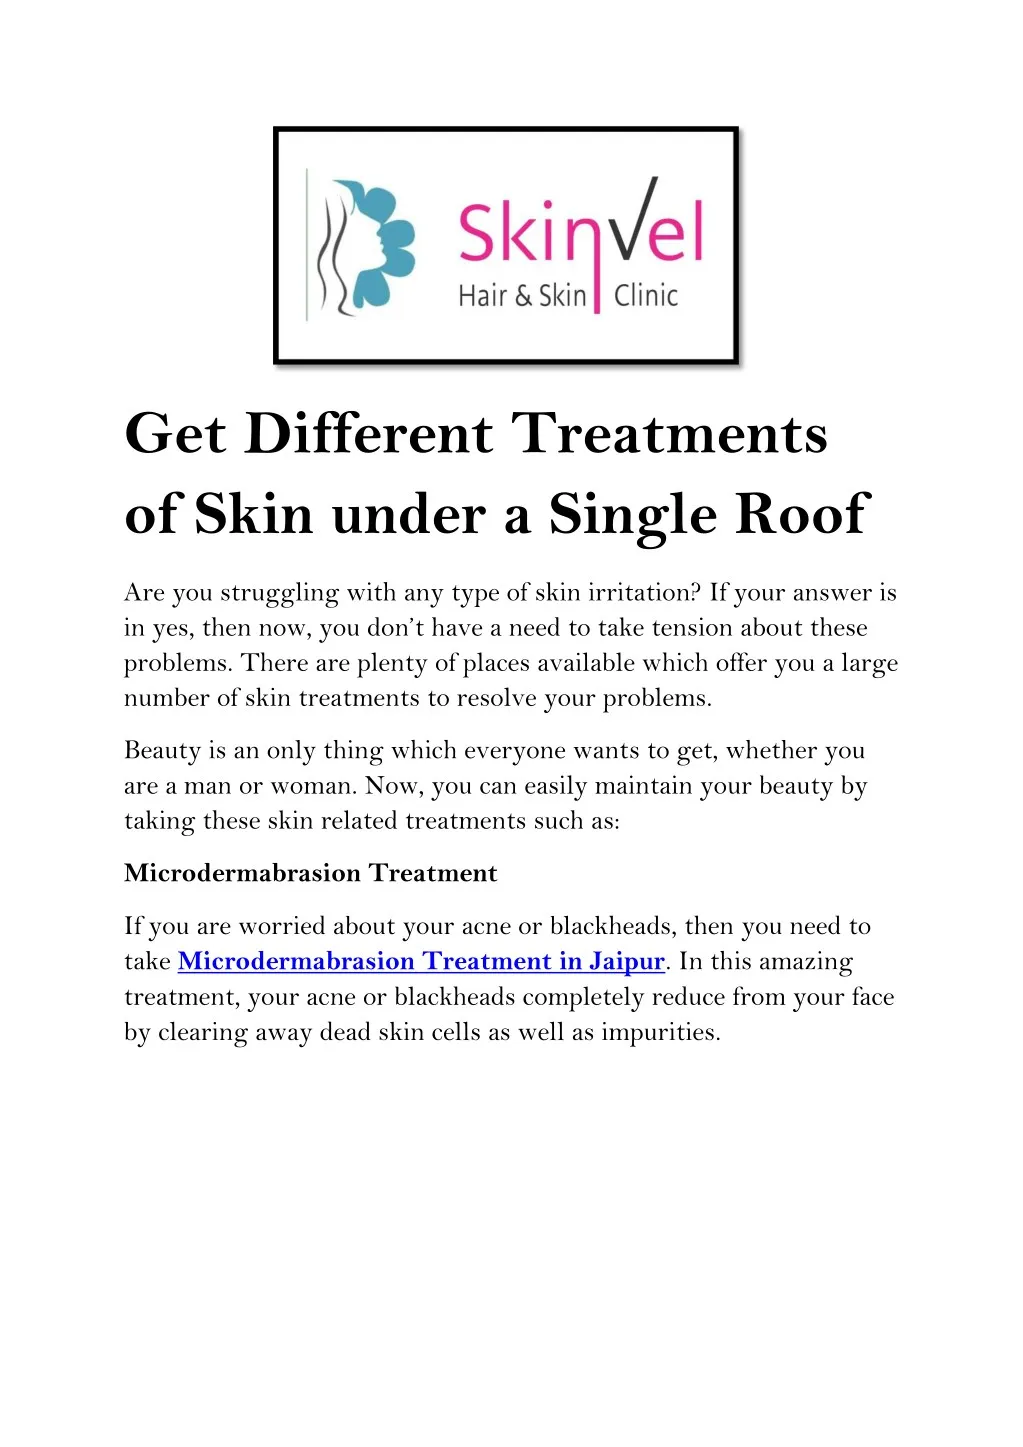 get different treatments of skin under a single